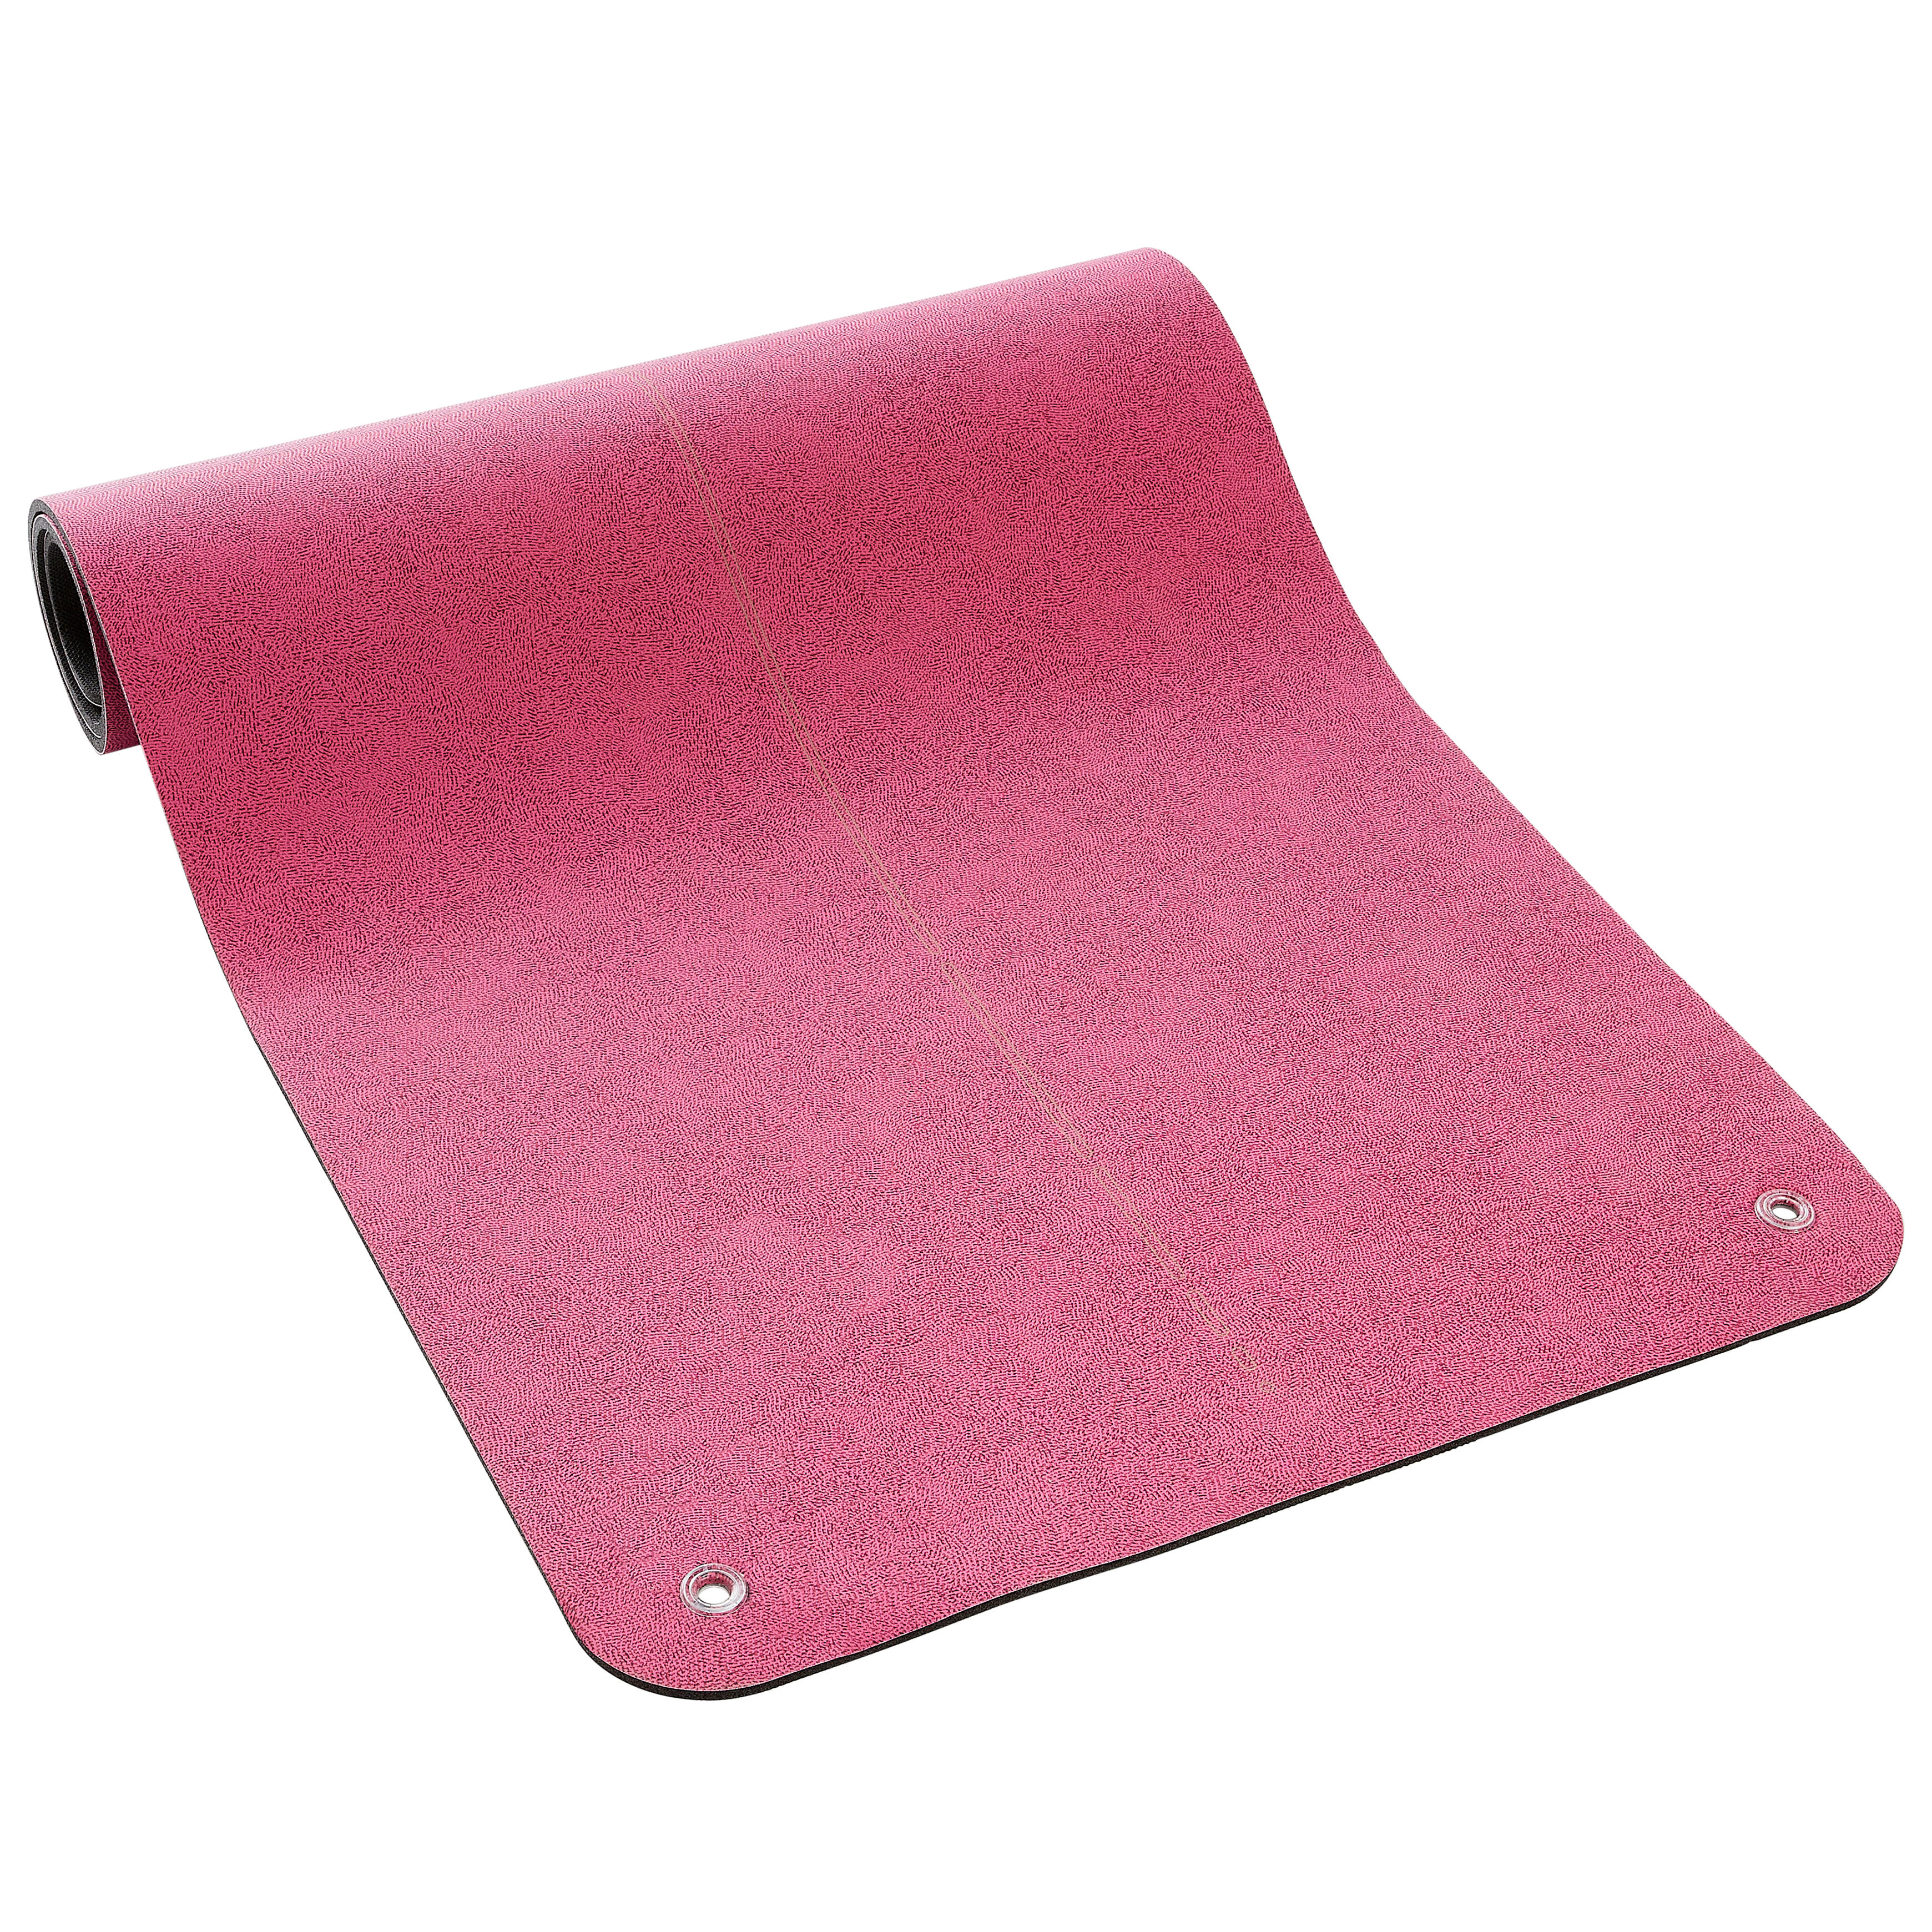 An exercise mat for Yoga and home workouts by Decathlon